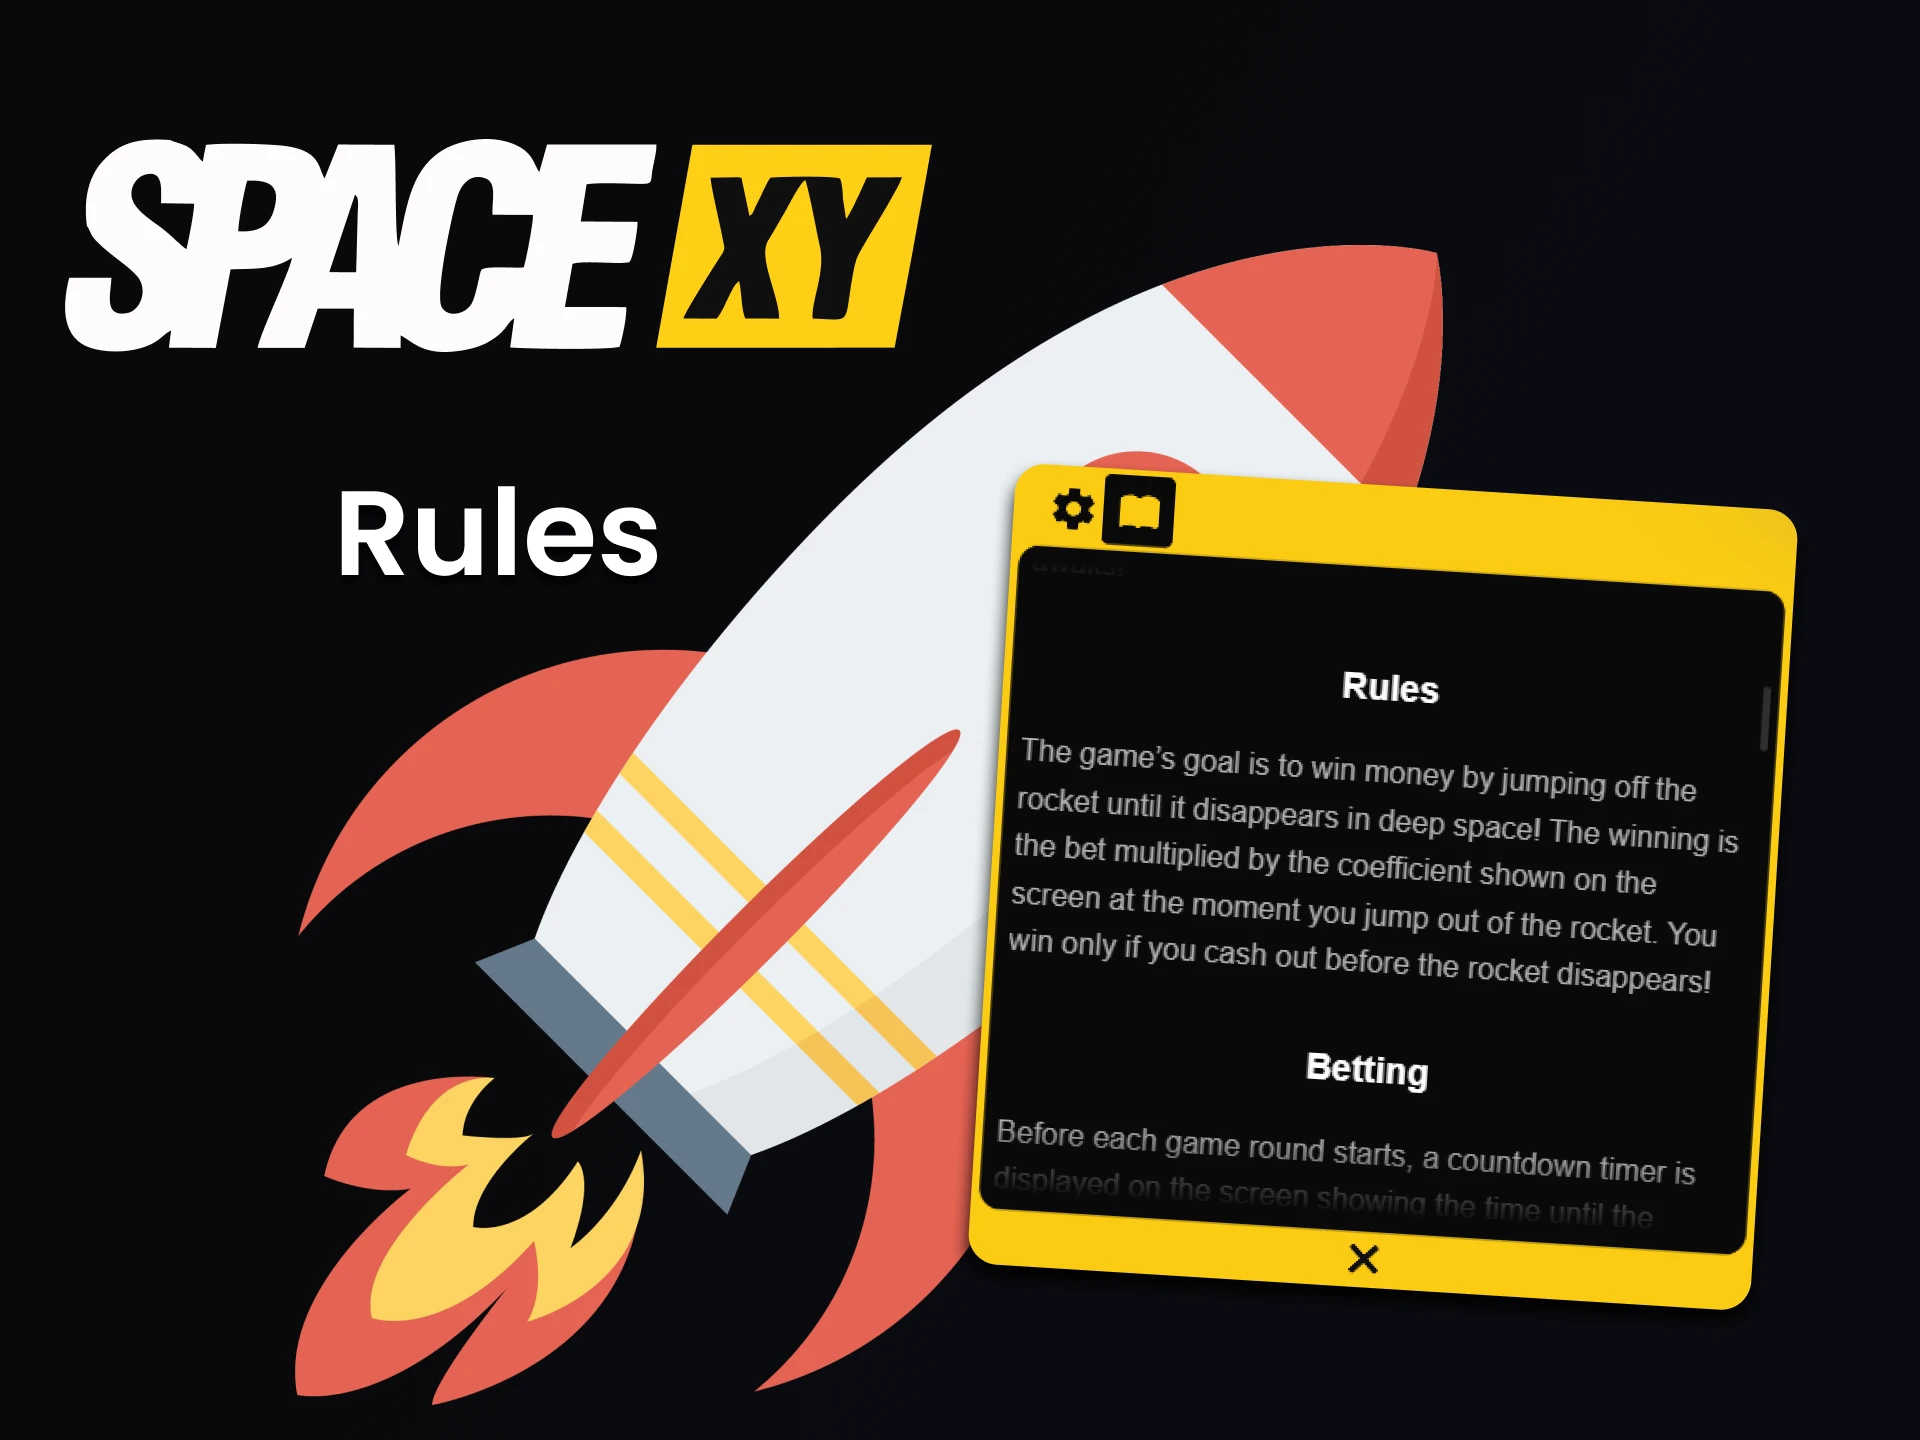 Learn the rules of the Space XY game.